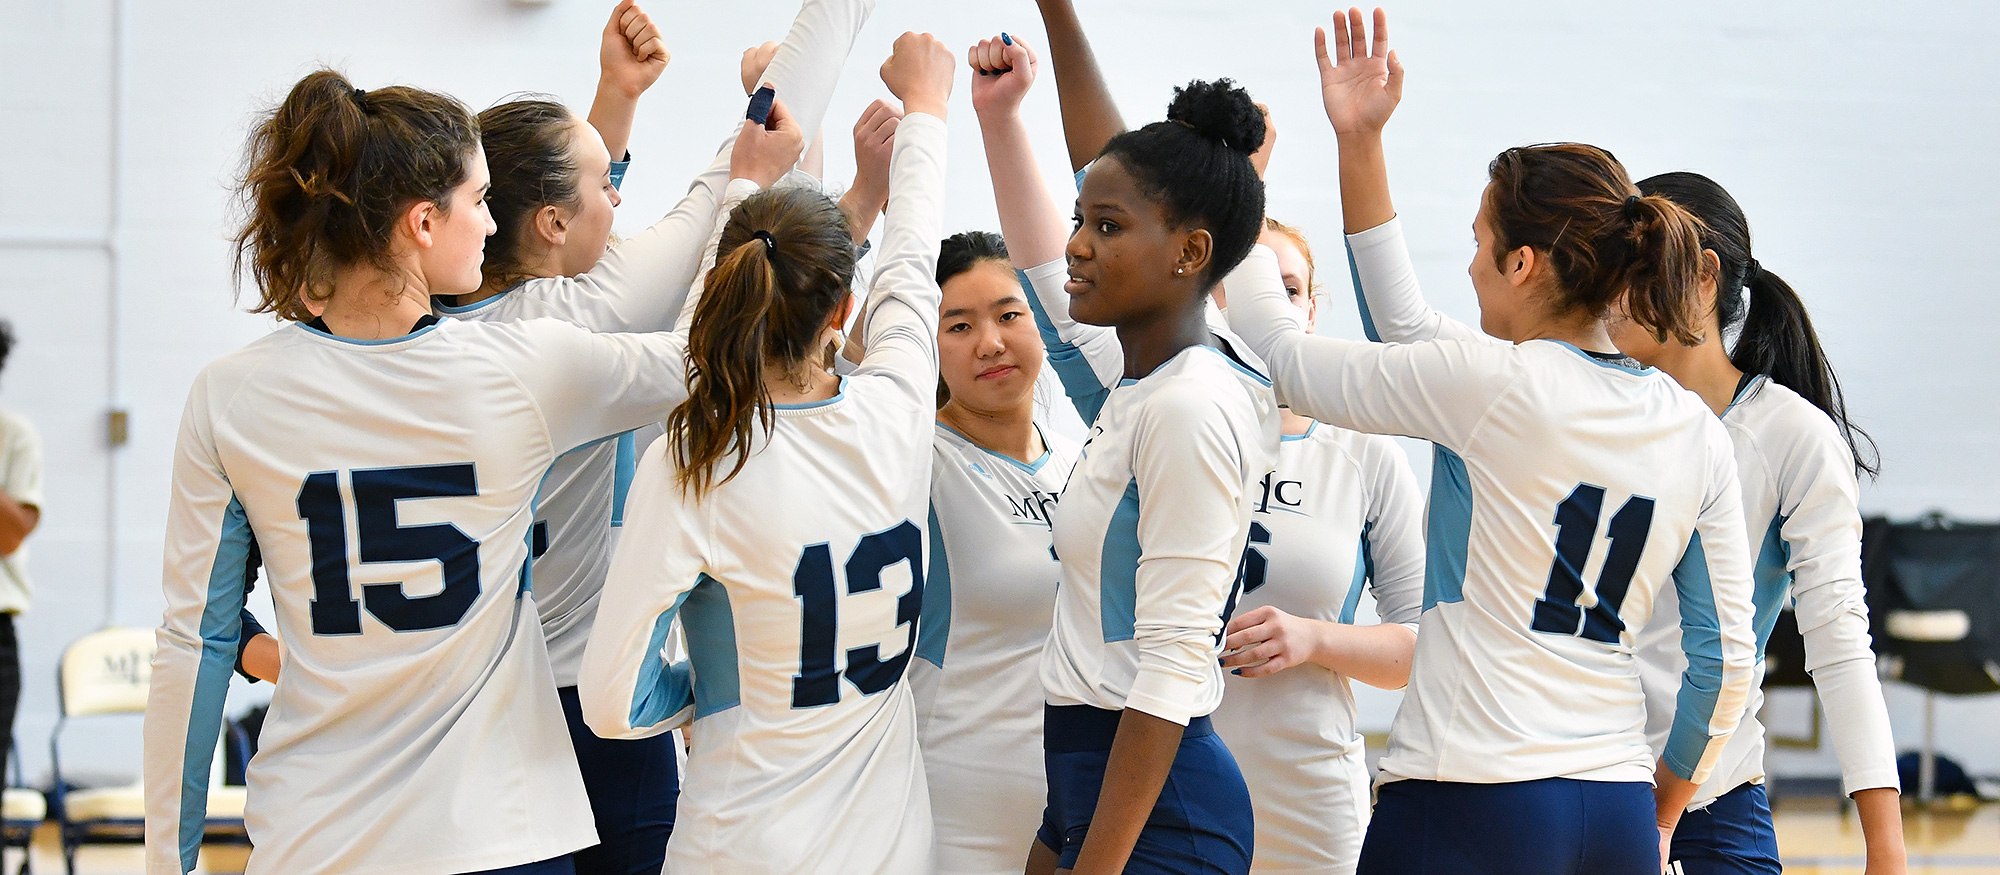 Tuesday volleyball match vs. Wheaton cancelled